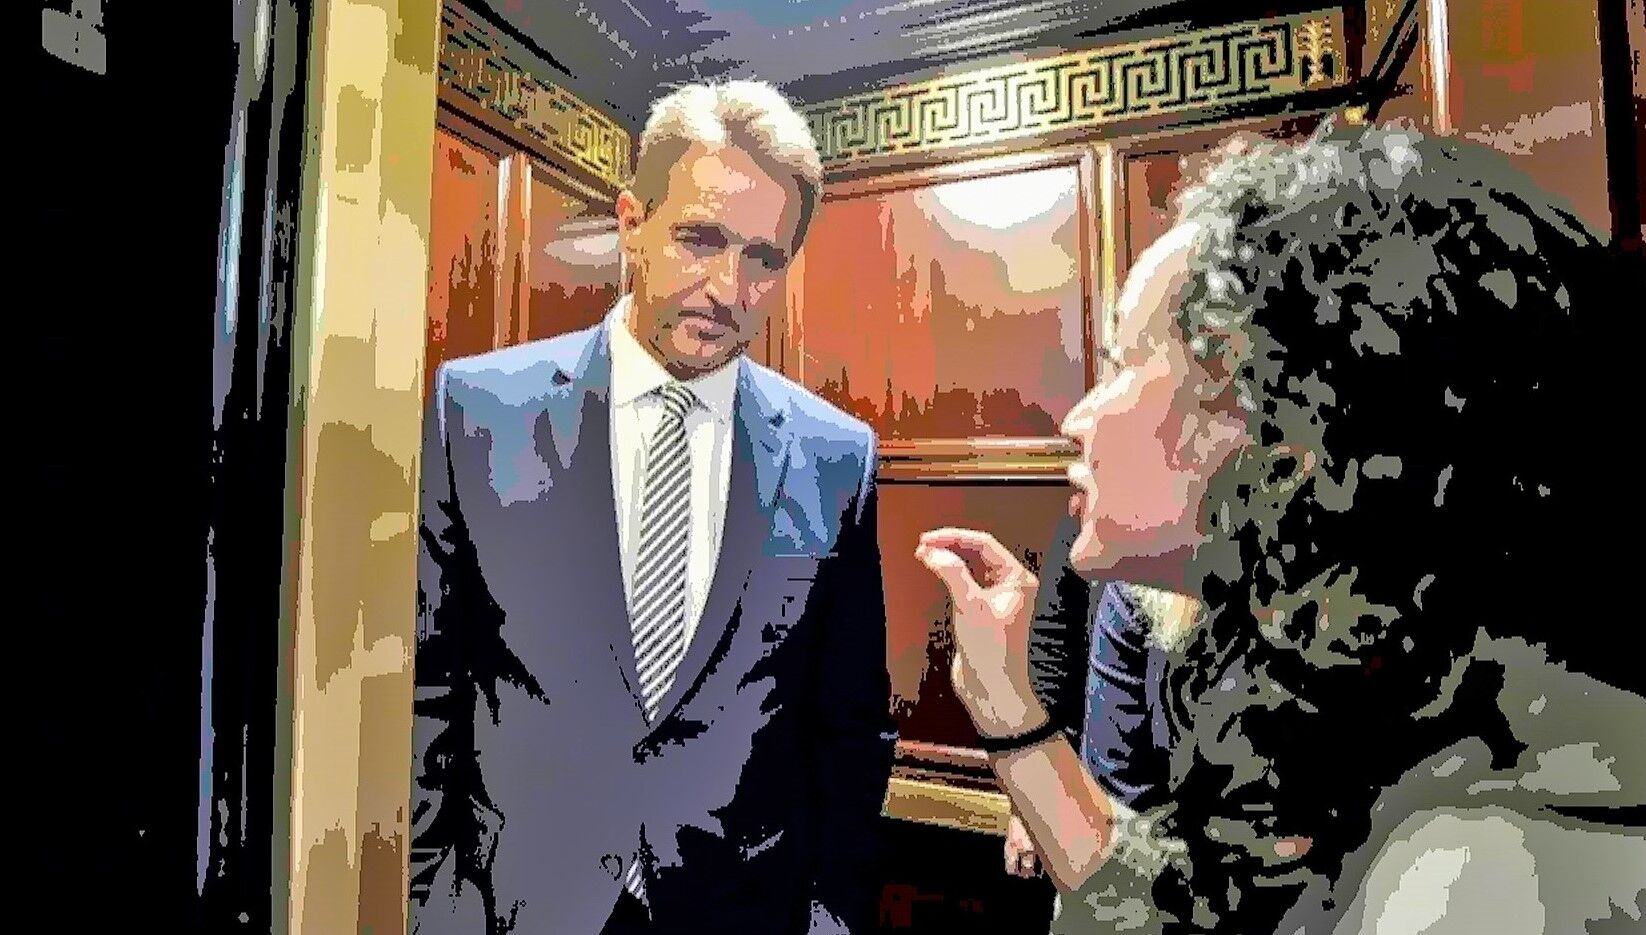 Republican Senator Jeff Flake is confronted in the elevator by a woman telling her story of sexual assault. Flake voted to confirm Brett Kavanaugh to the Supreme Court despite numerous allegations of sexual assault.